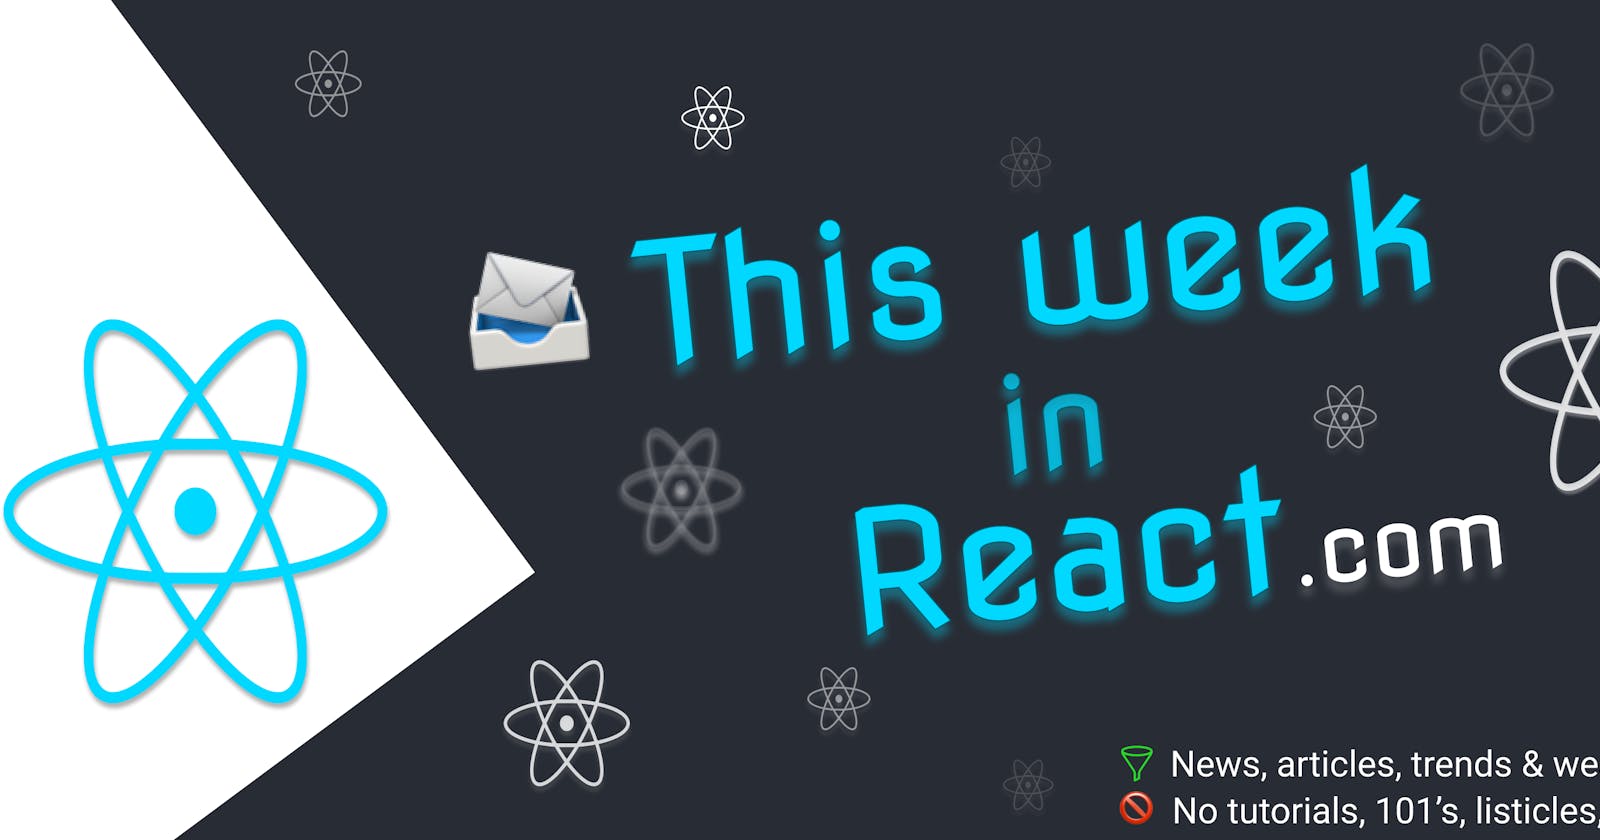 This Week In React #151: Remotion, Next.js, SVG-in-JS, TypeScript, Expo, VisionCamera, Conform, TinyBase, i18n, App Clips, ES2023, CommonJS...